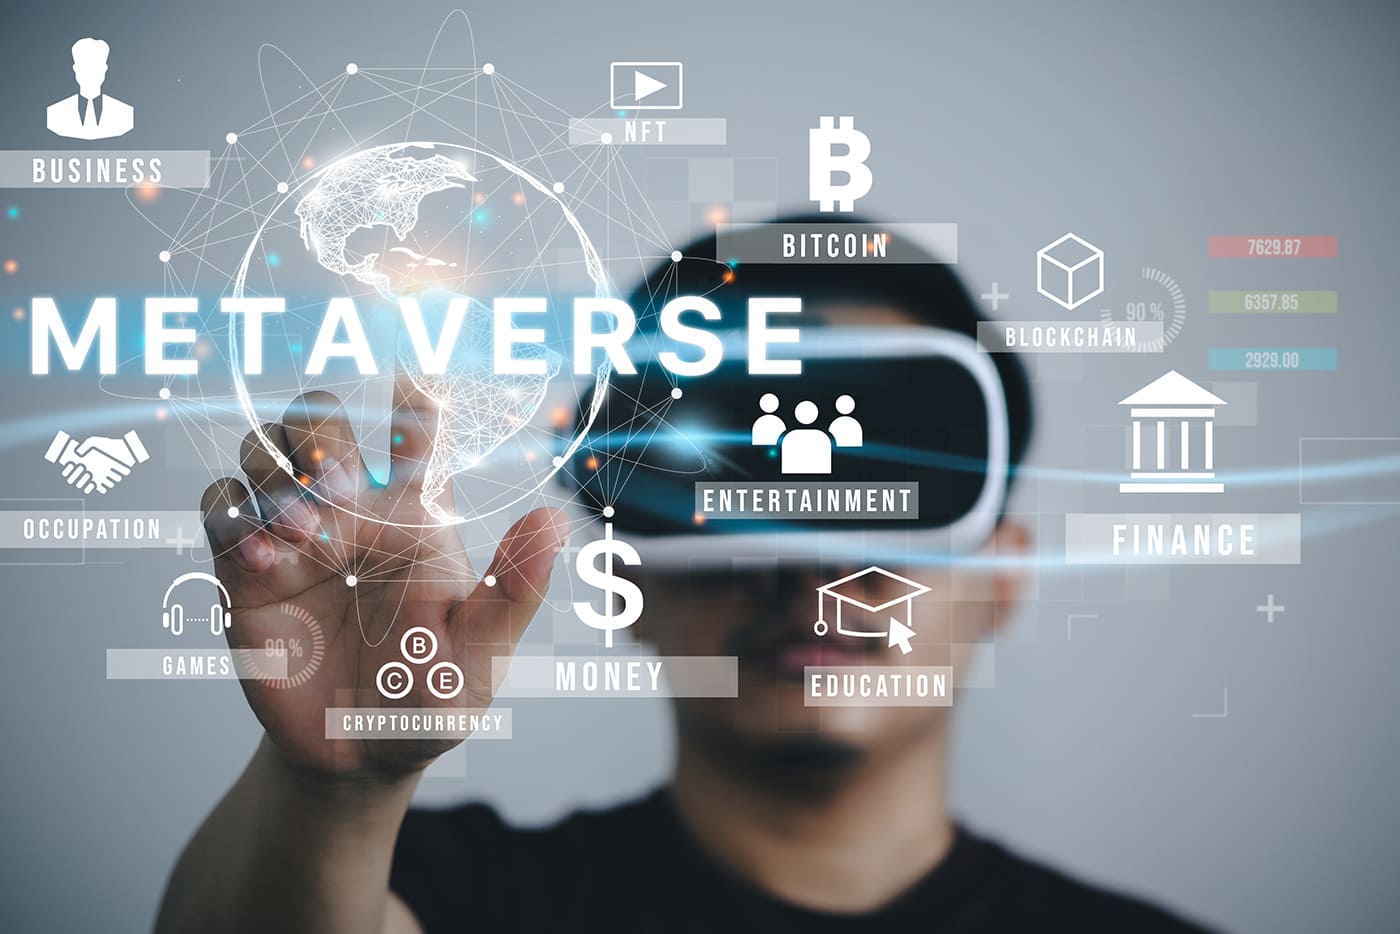 What Is Metaverse Used For?